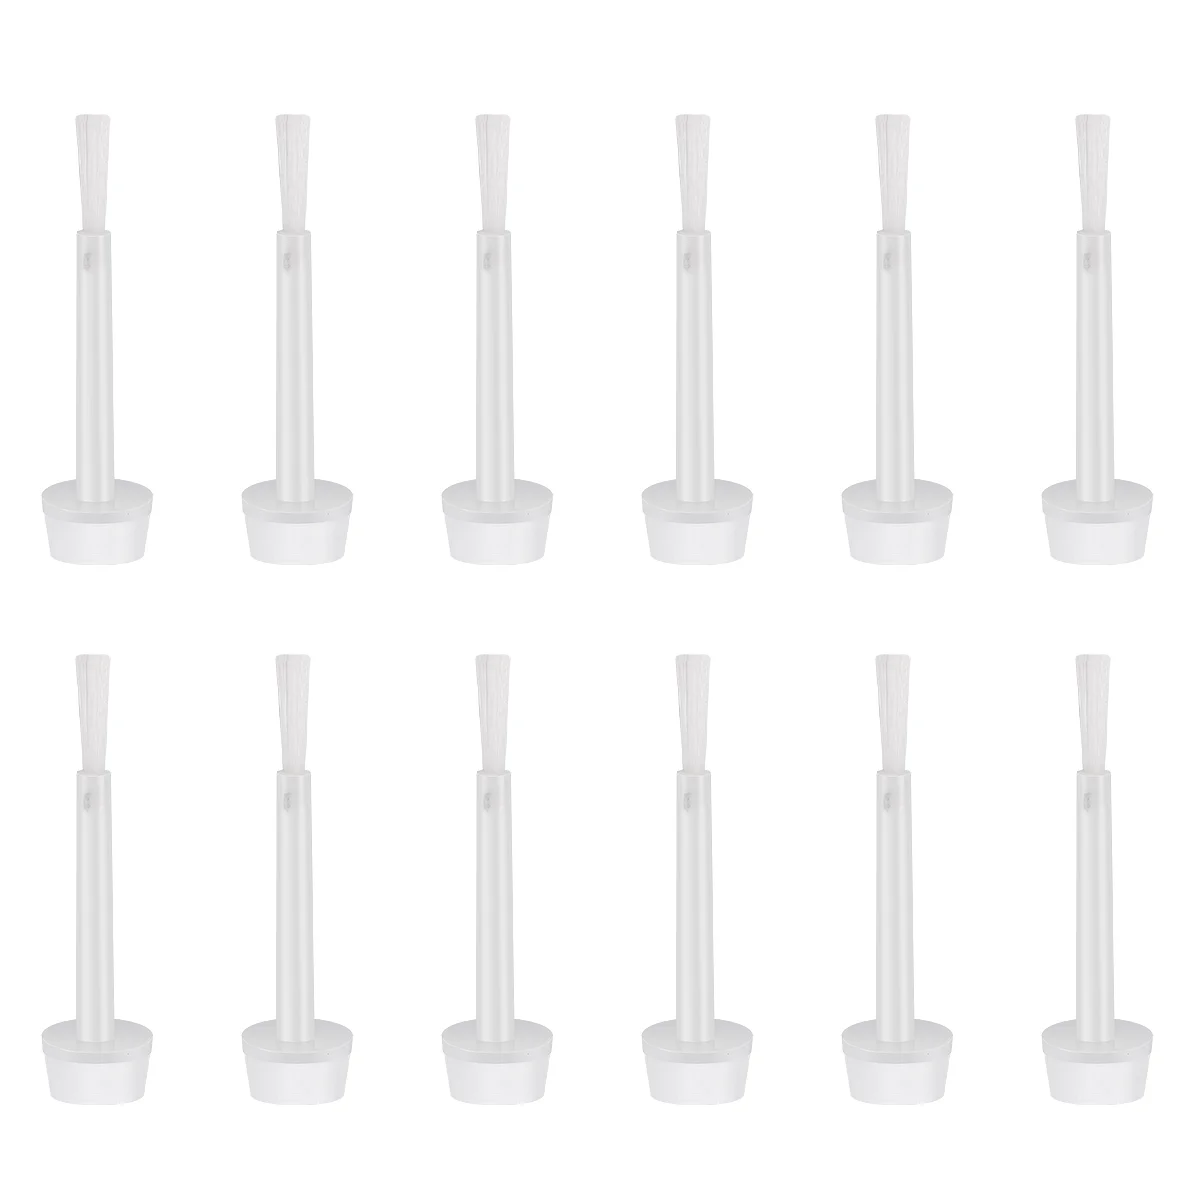 

Lurrose 100pcs Nail Polish Replacement Brushes Dipping Liquid Applicator Brushes Manicure Tools